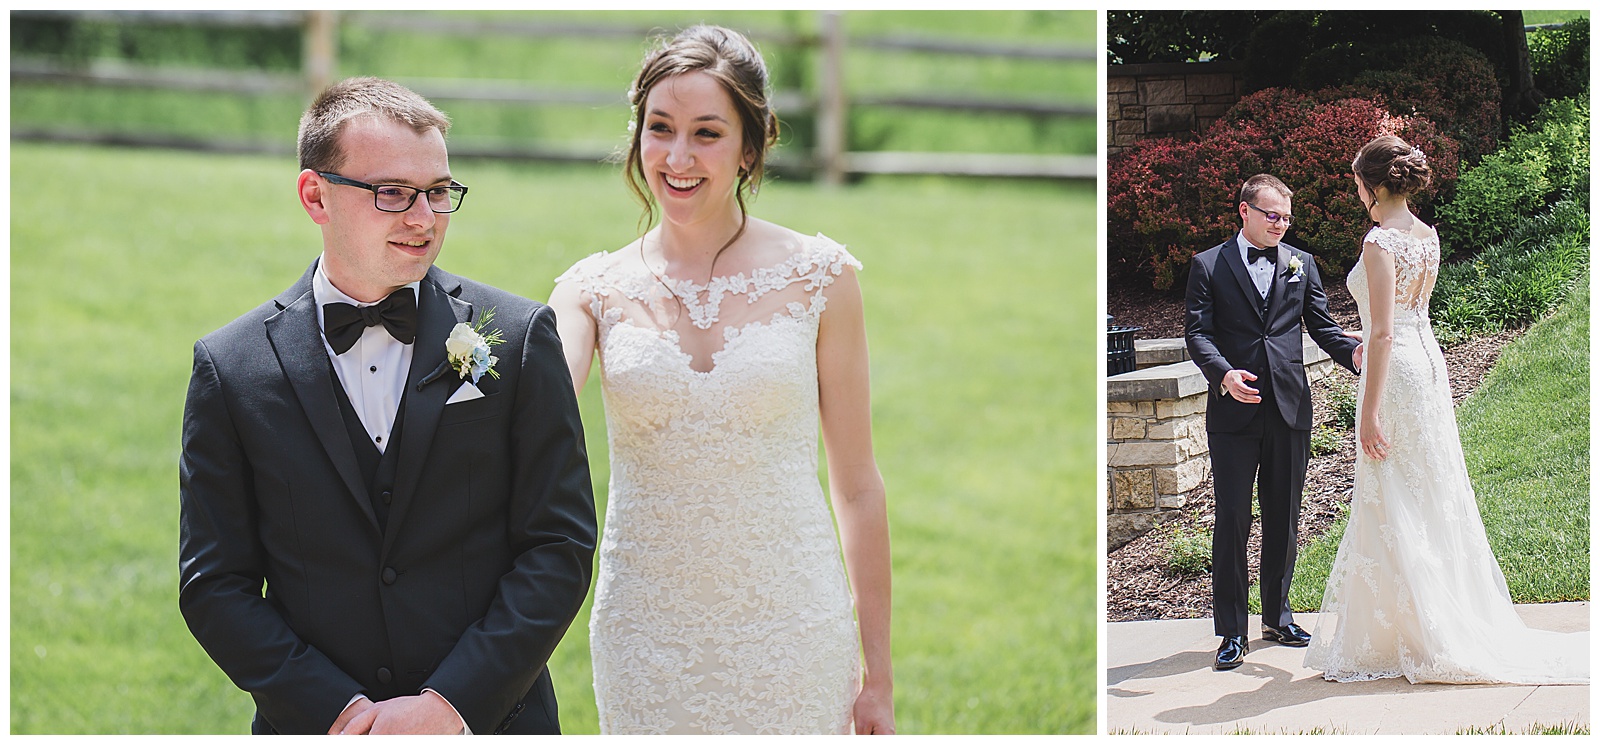 Wedding photography and videography at The Lodge at Ironwoods in Leawood, Kansas, by Kansas City wedding photographers Wisdom-Watson Weddings.